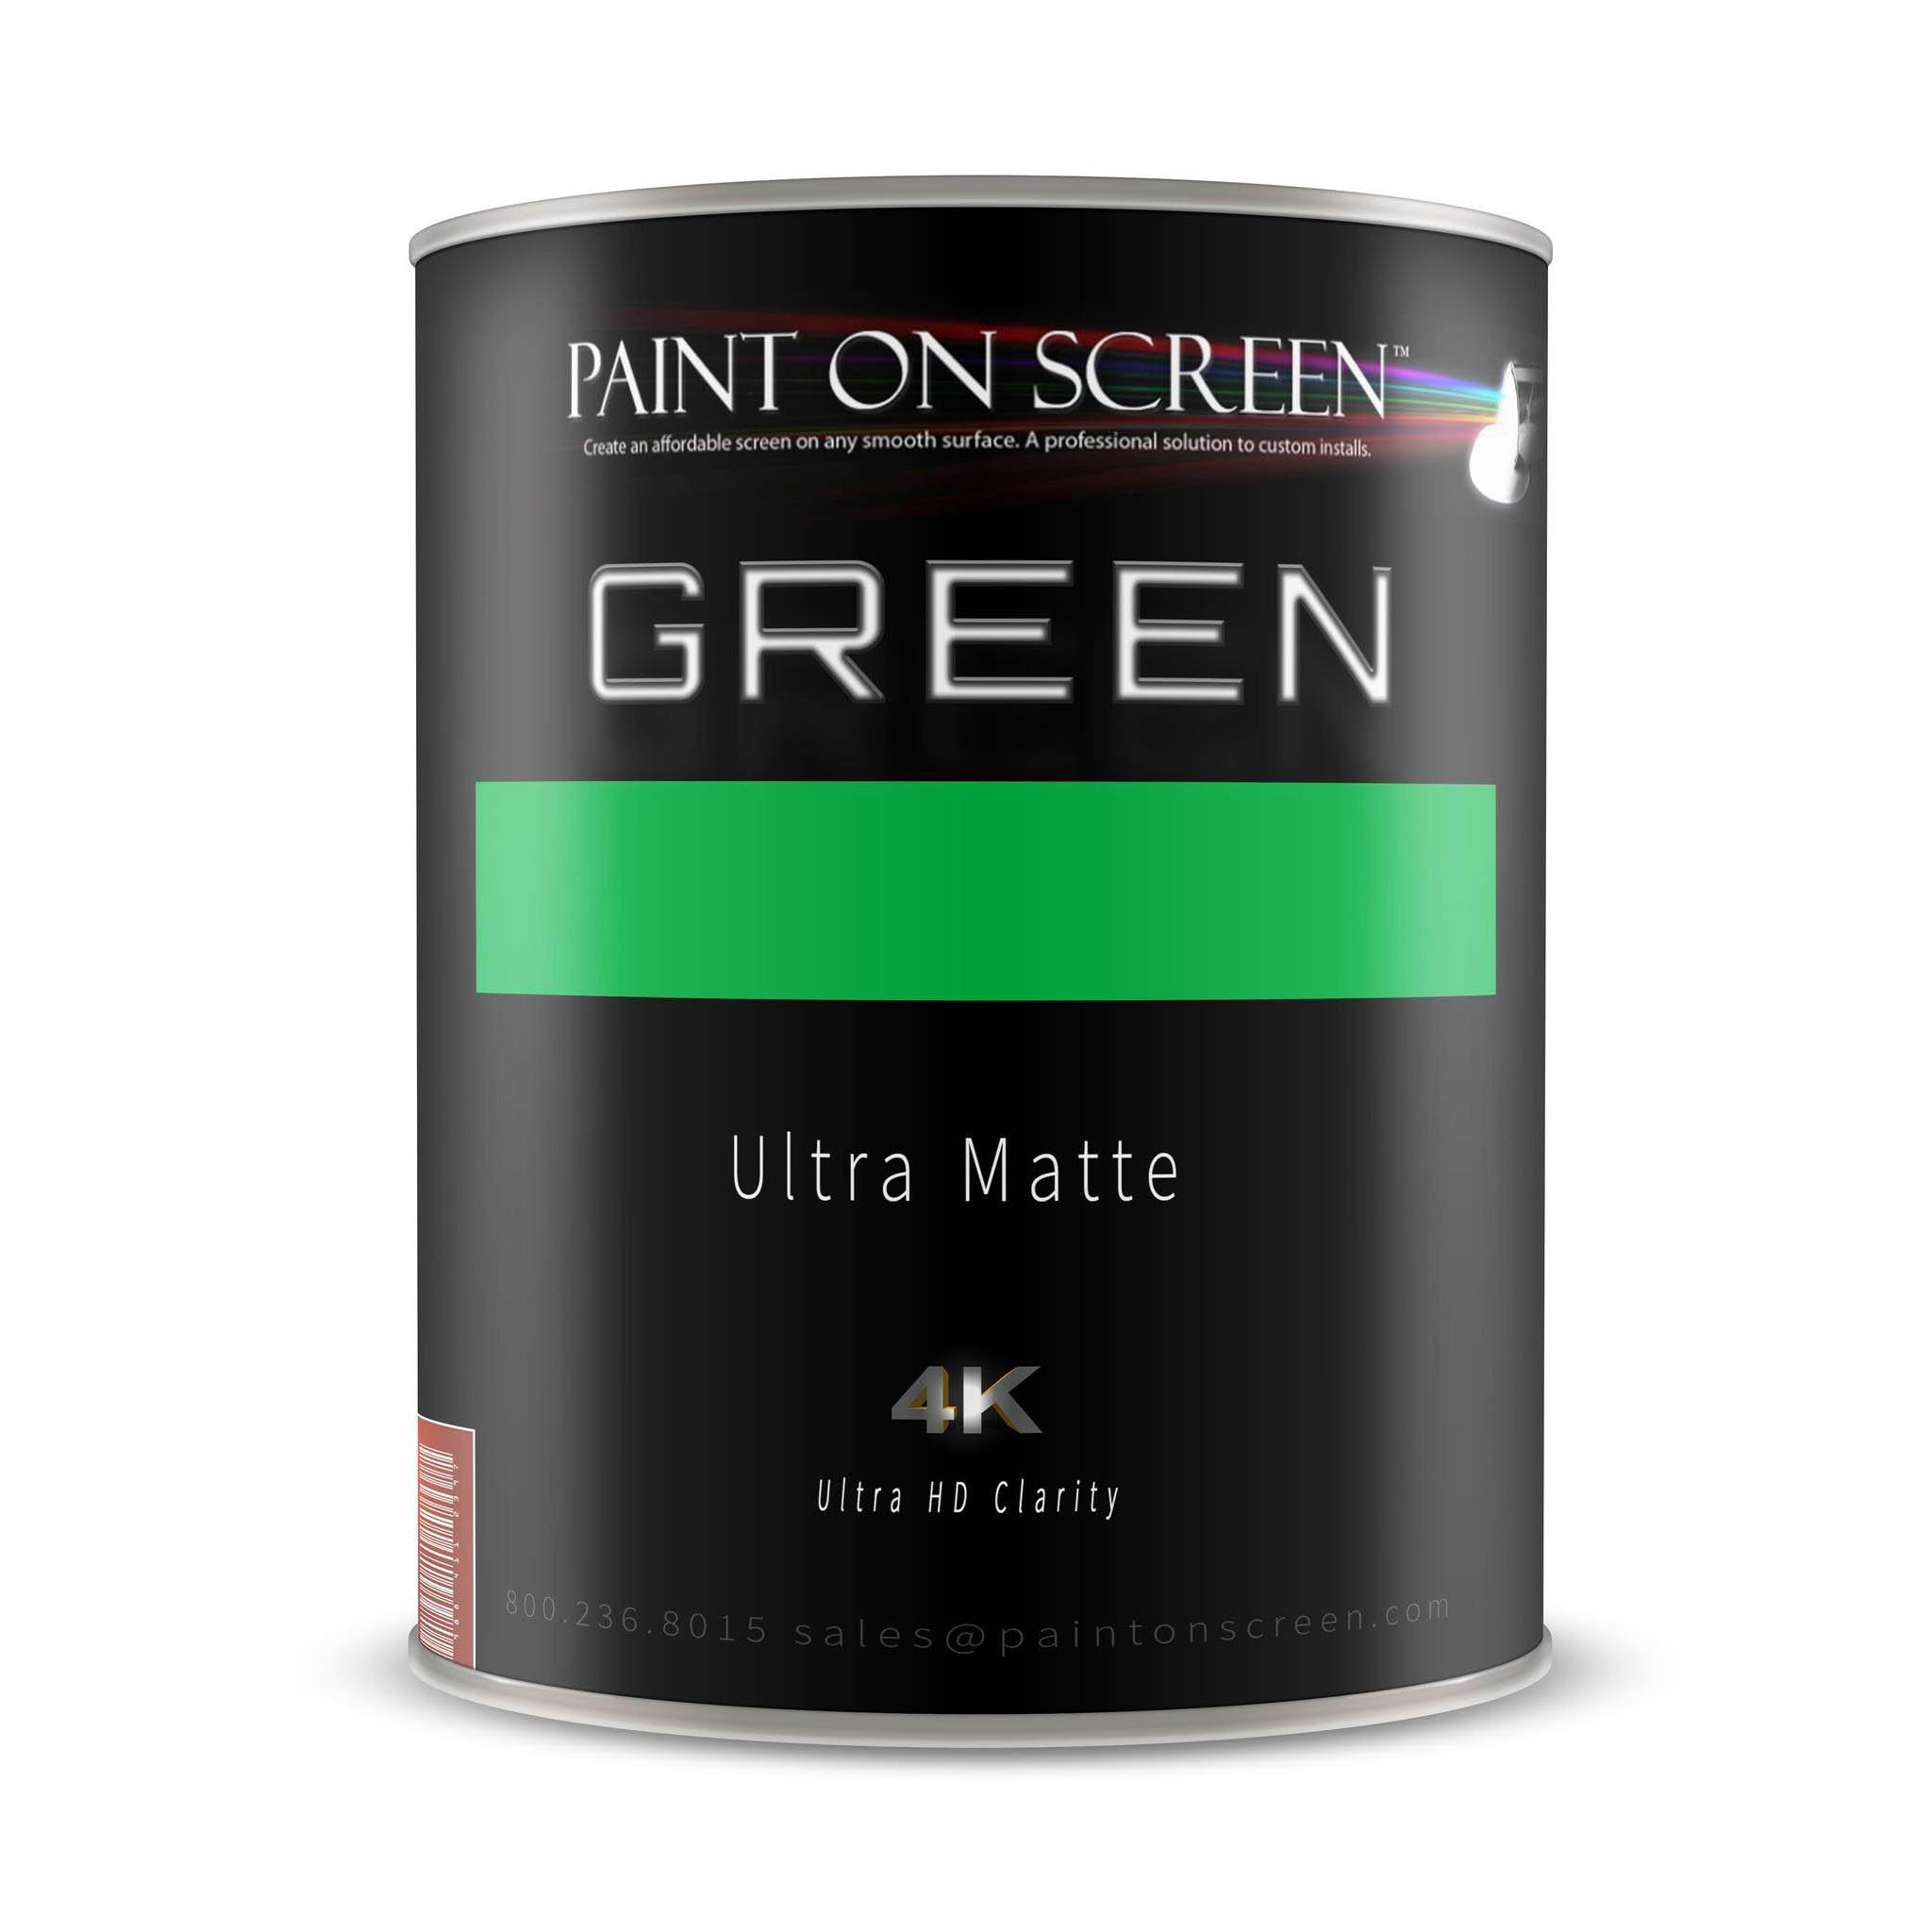 Projection / Projector Screen Paint - Chroma Key Green Paint - Quart